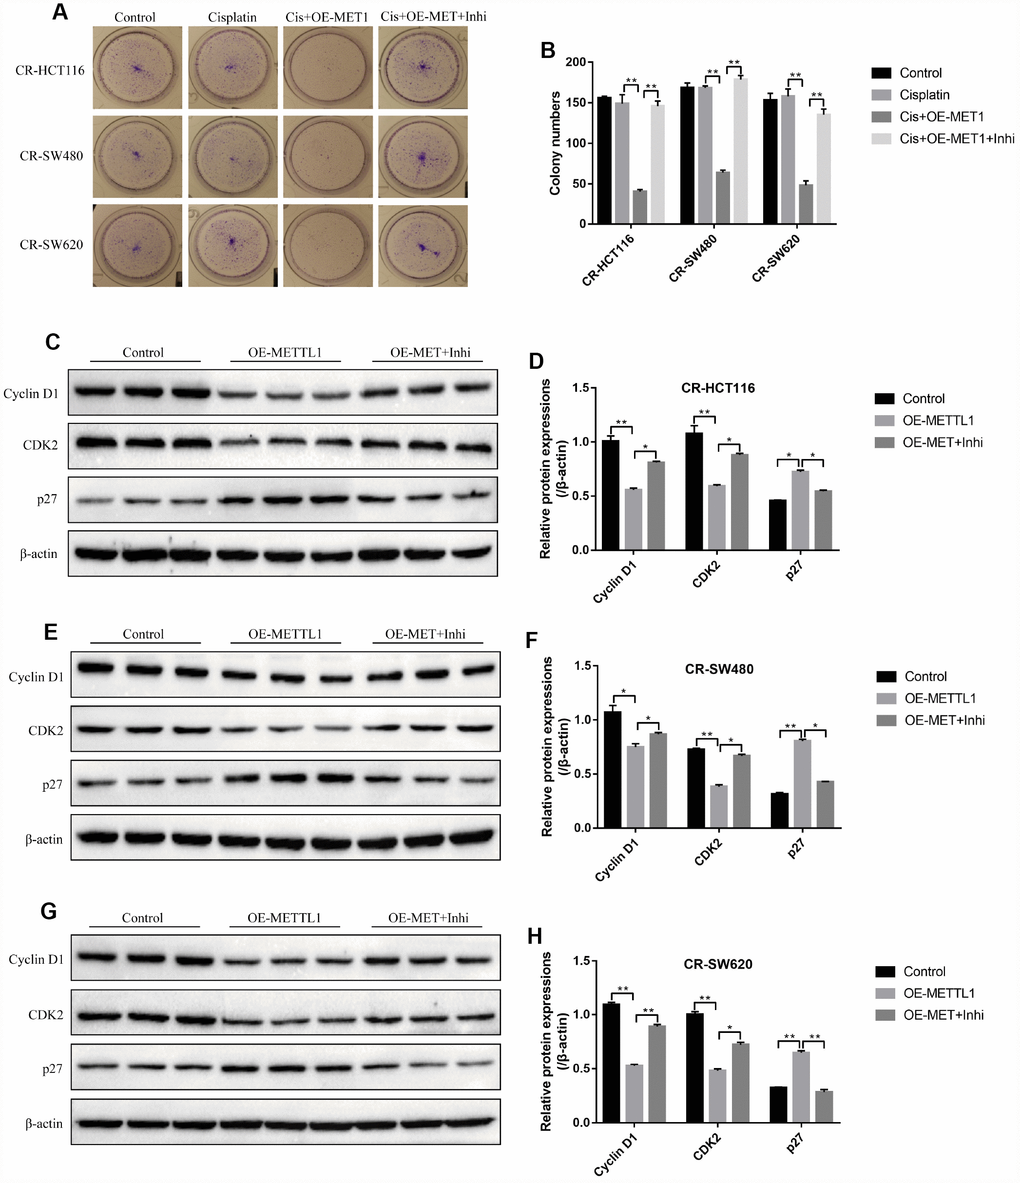 METTL1 regulated CR-CC cell proliferation by targeting miR-149-3p. (A, B) Colony formation assay was performed to evaluate the colony formation abilities in CC cells. Western Blot was conducted to detect the expression levels of Cyclin D1, CDK2 and p27 in (C, D) CR-HCT116 cells, (E, F) CR-SW480 cells and (G, H) CR-SW620 cells. (“OE-METTL1” represented “Overexpressed METTL1 group”, and “OE-METTL1+Inhi” represented “Overexpressed METTL1 plus miR-149-3p inhibitor group”). All the experiments repeated at least 3 times. “*” means p p 